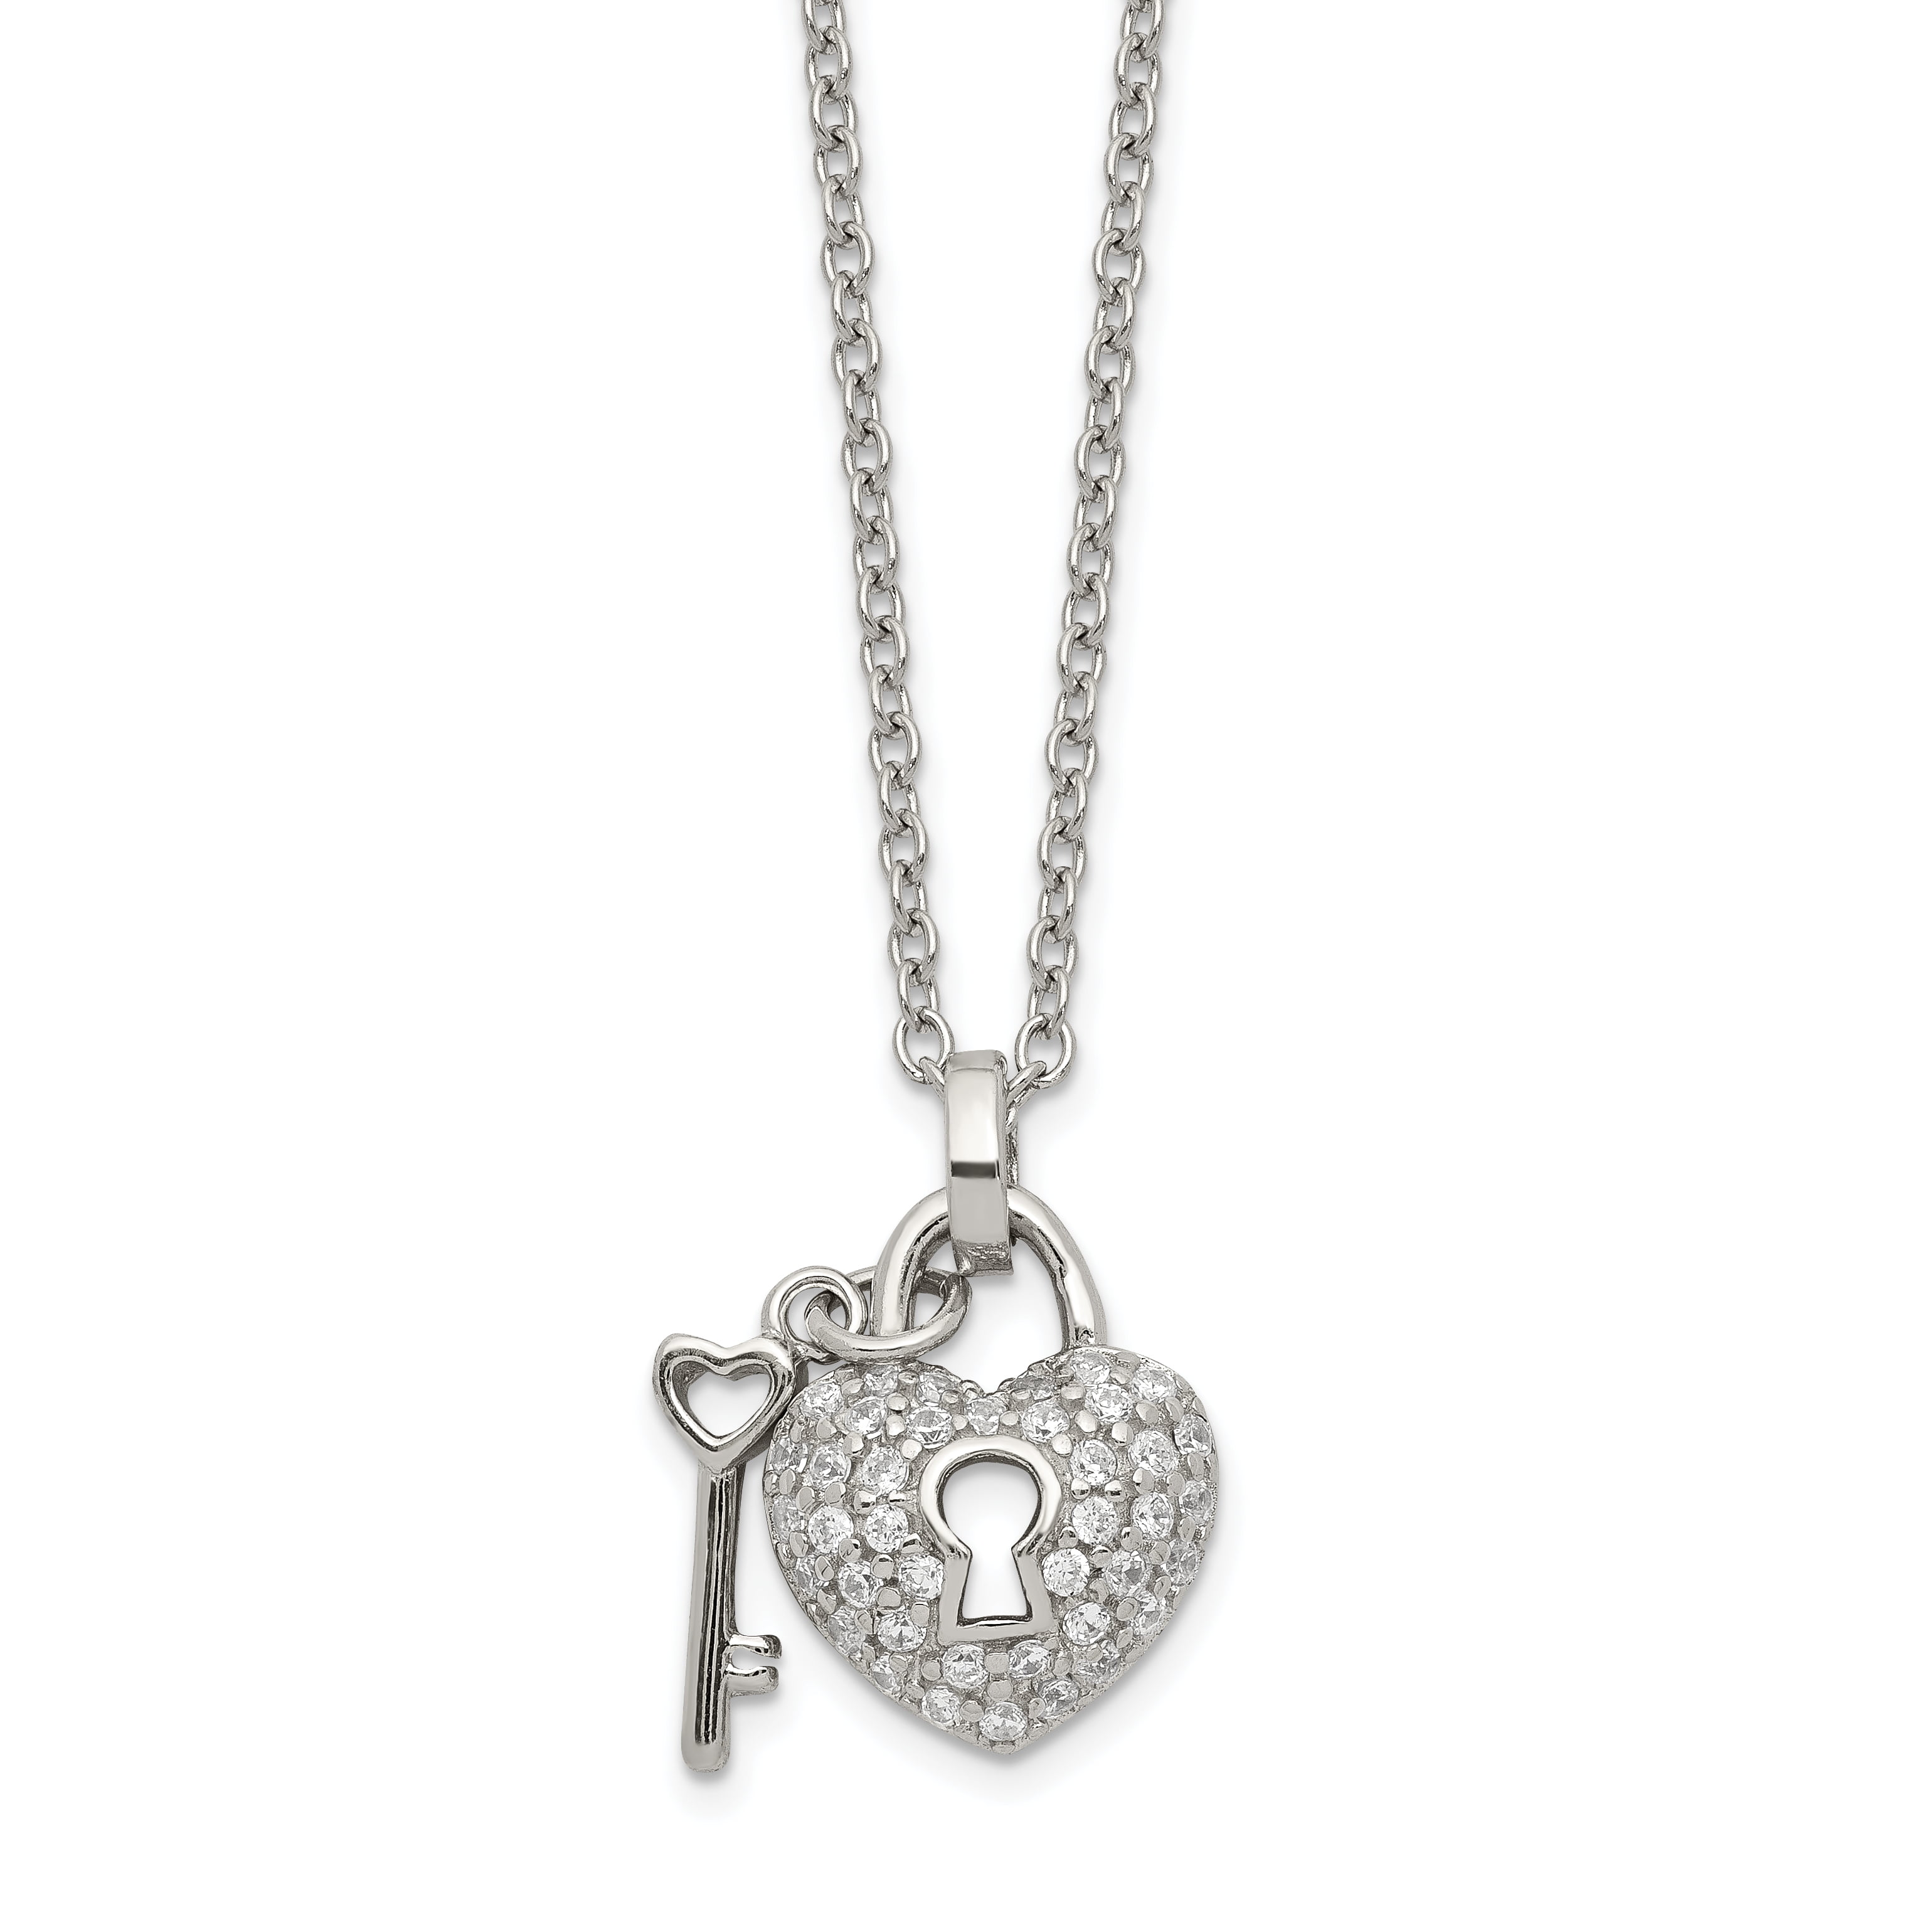 Sterling Silver Heart Key Heart Necklace Cz accents 16 inch chain